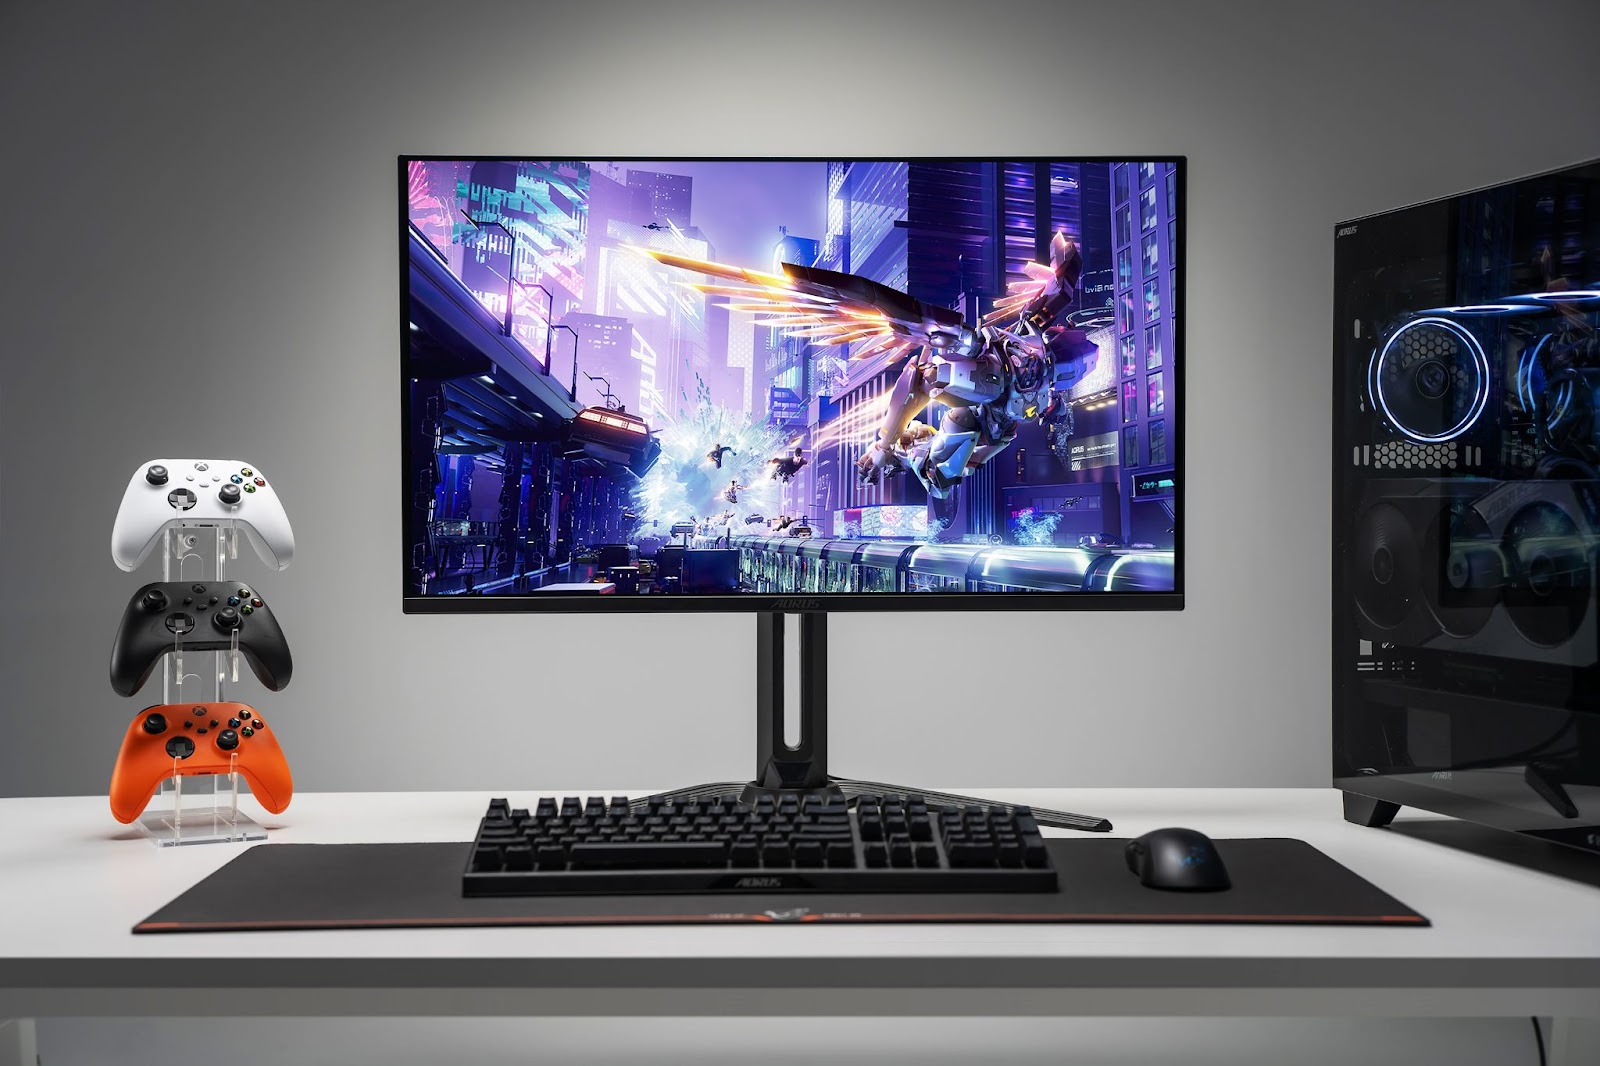 GIGABYTE monitor next to a controller tower and PC.